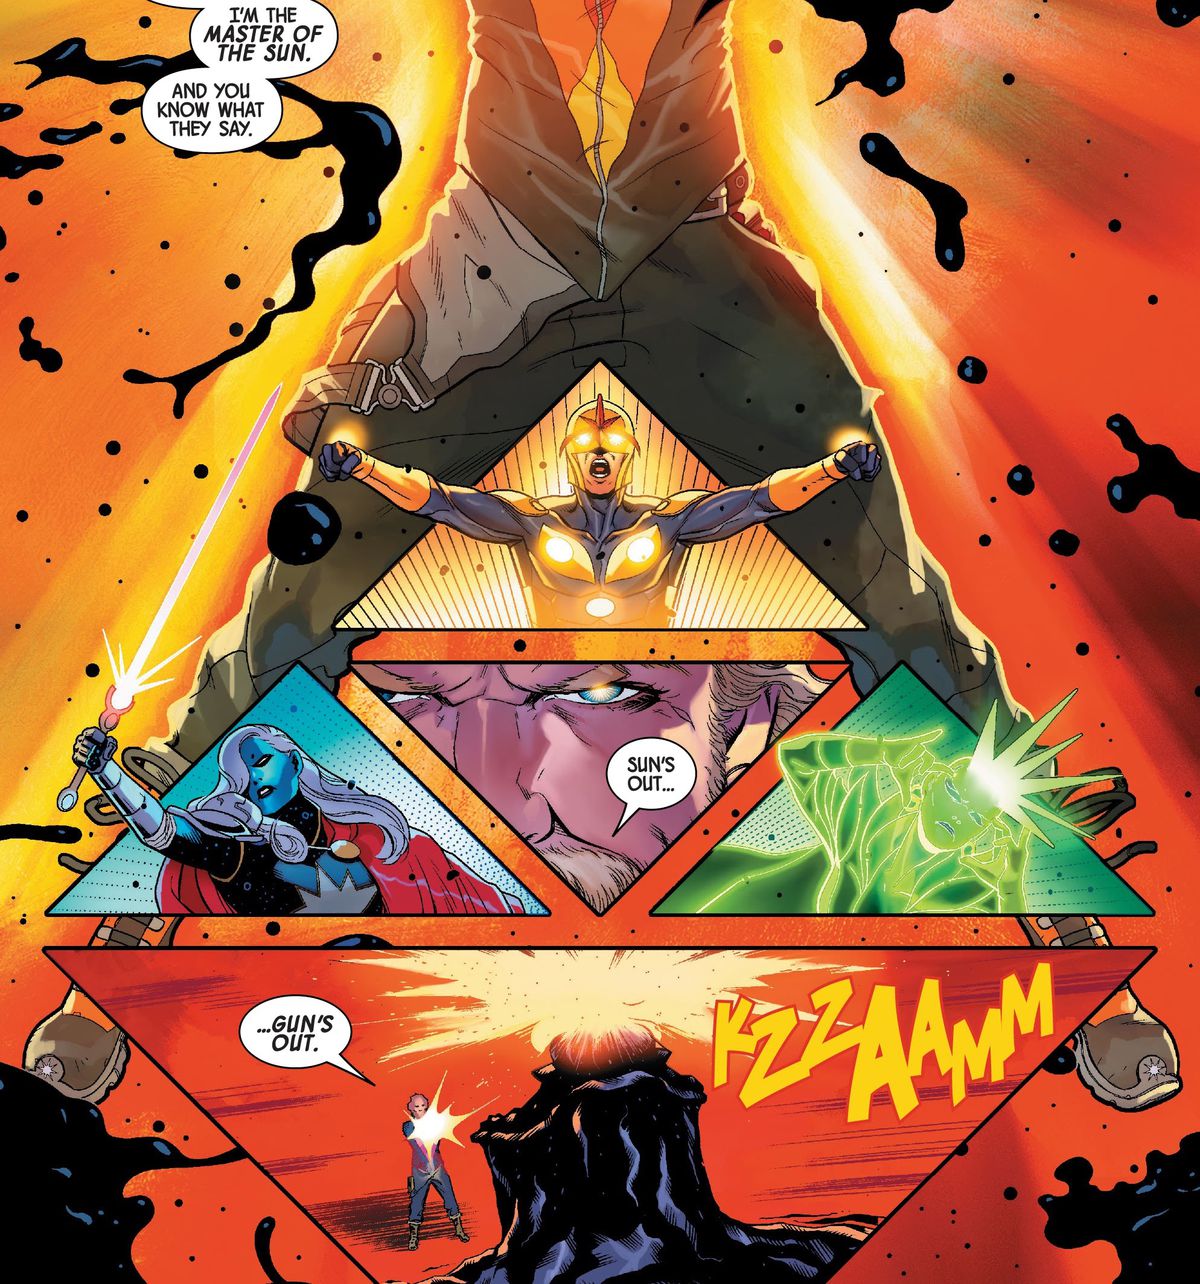 “I’m the master of the sun,” says Star-Lord, “And you know what they say. Sun’s out, gun’s out,” as he shoots a god in the head in Guardians of the Galaxy #10, Marvel Comics (2020). 